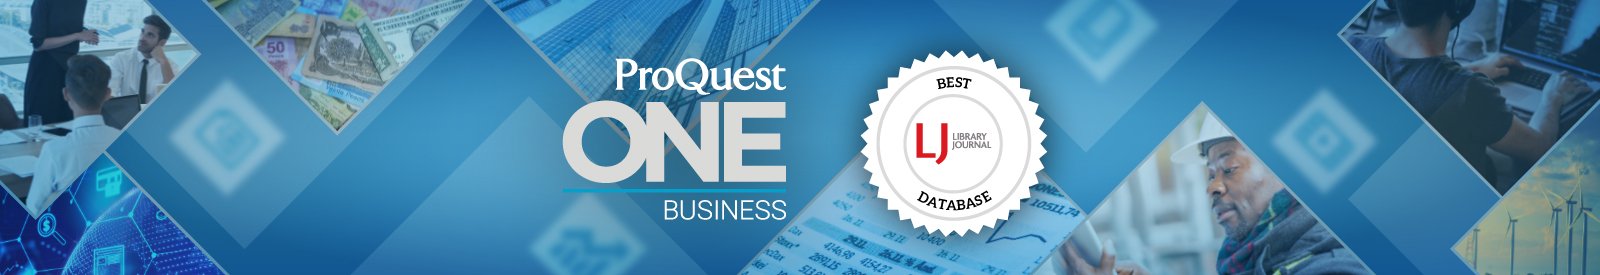 ProQuest One Business: A Library Journal最佳数据库奖